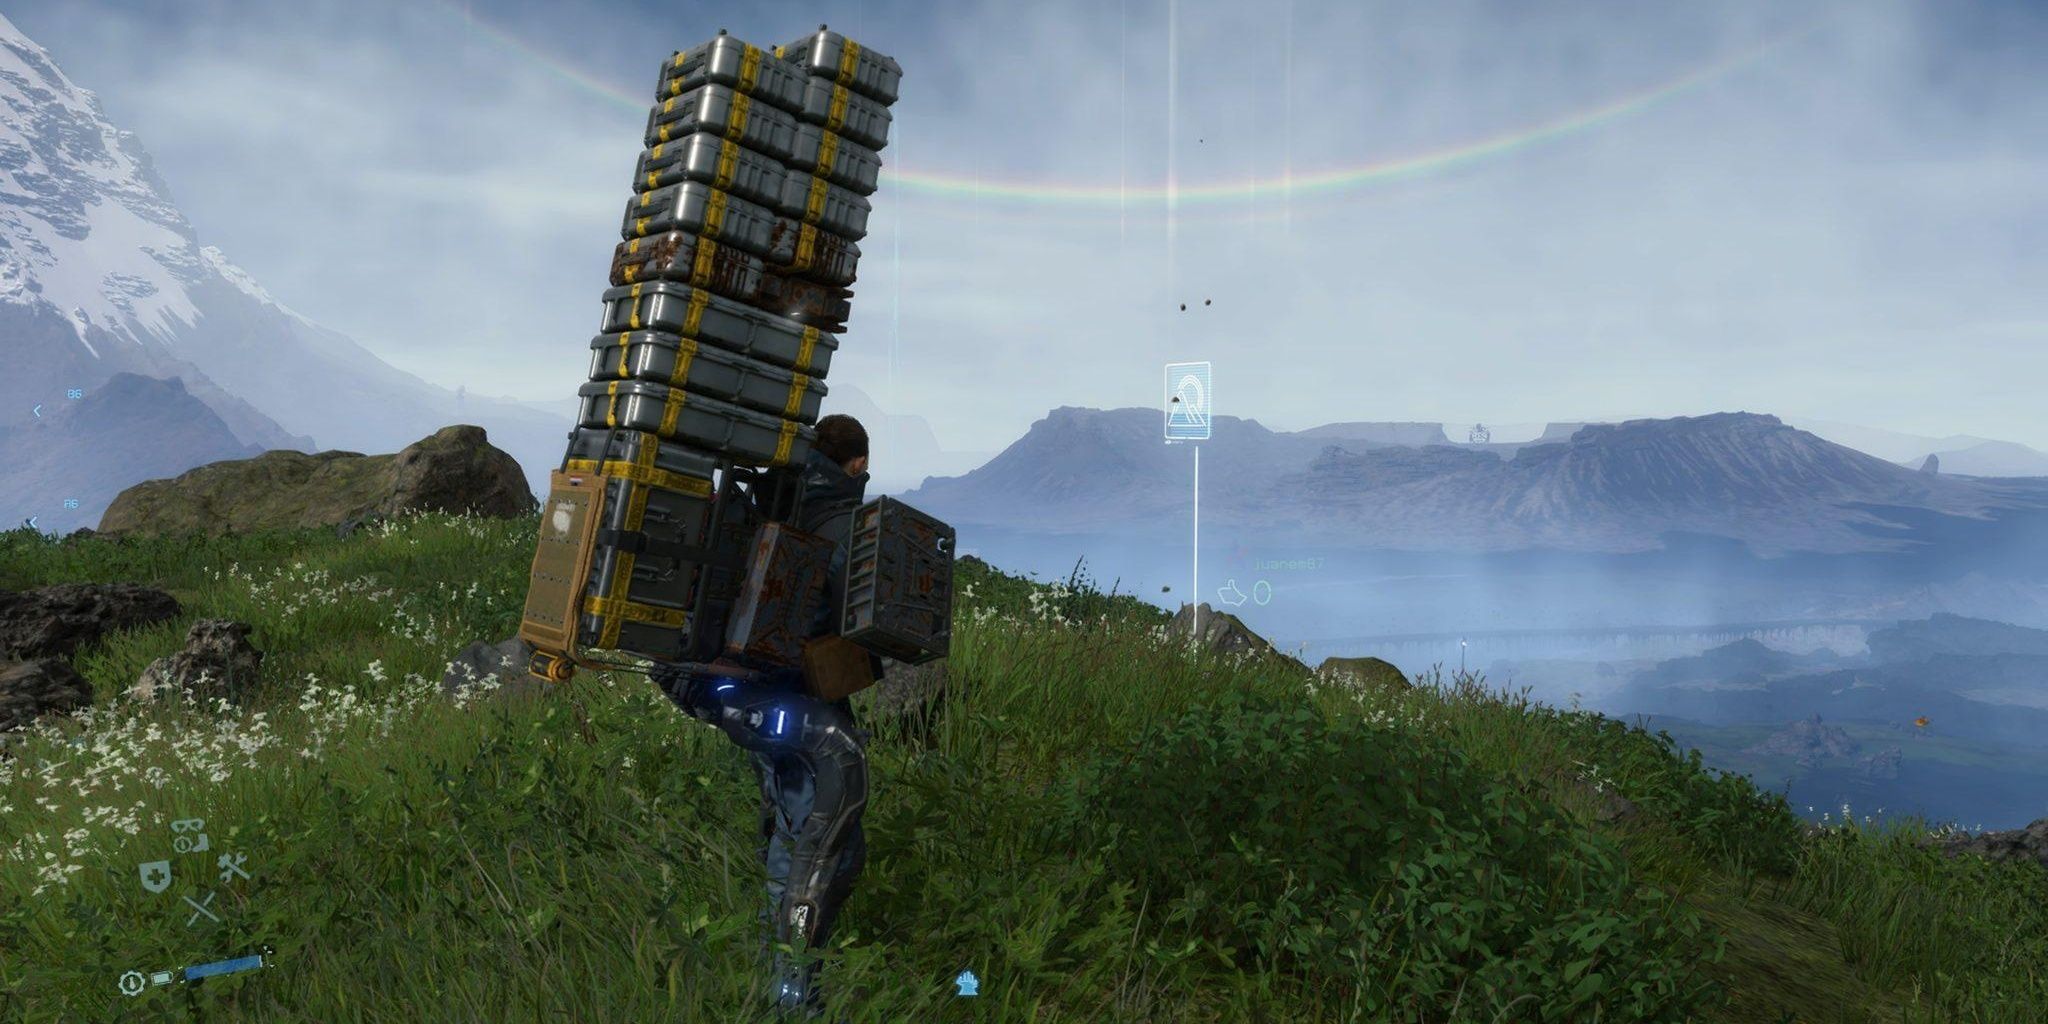 Sam Bridges (Norman Reedus) carries a huge number of boxes and crates on his back in the game Death Stranding. A rainbow is in the background